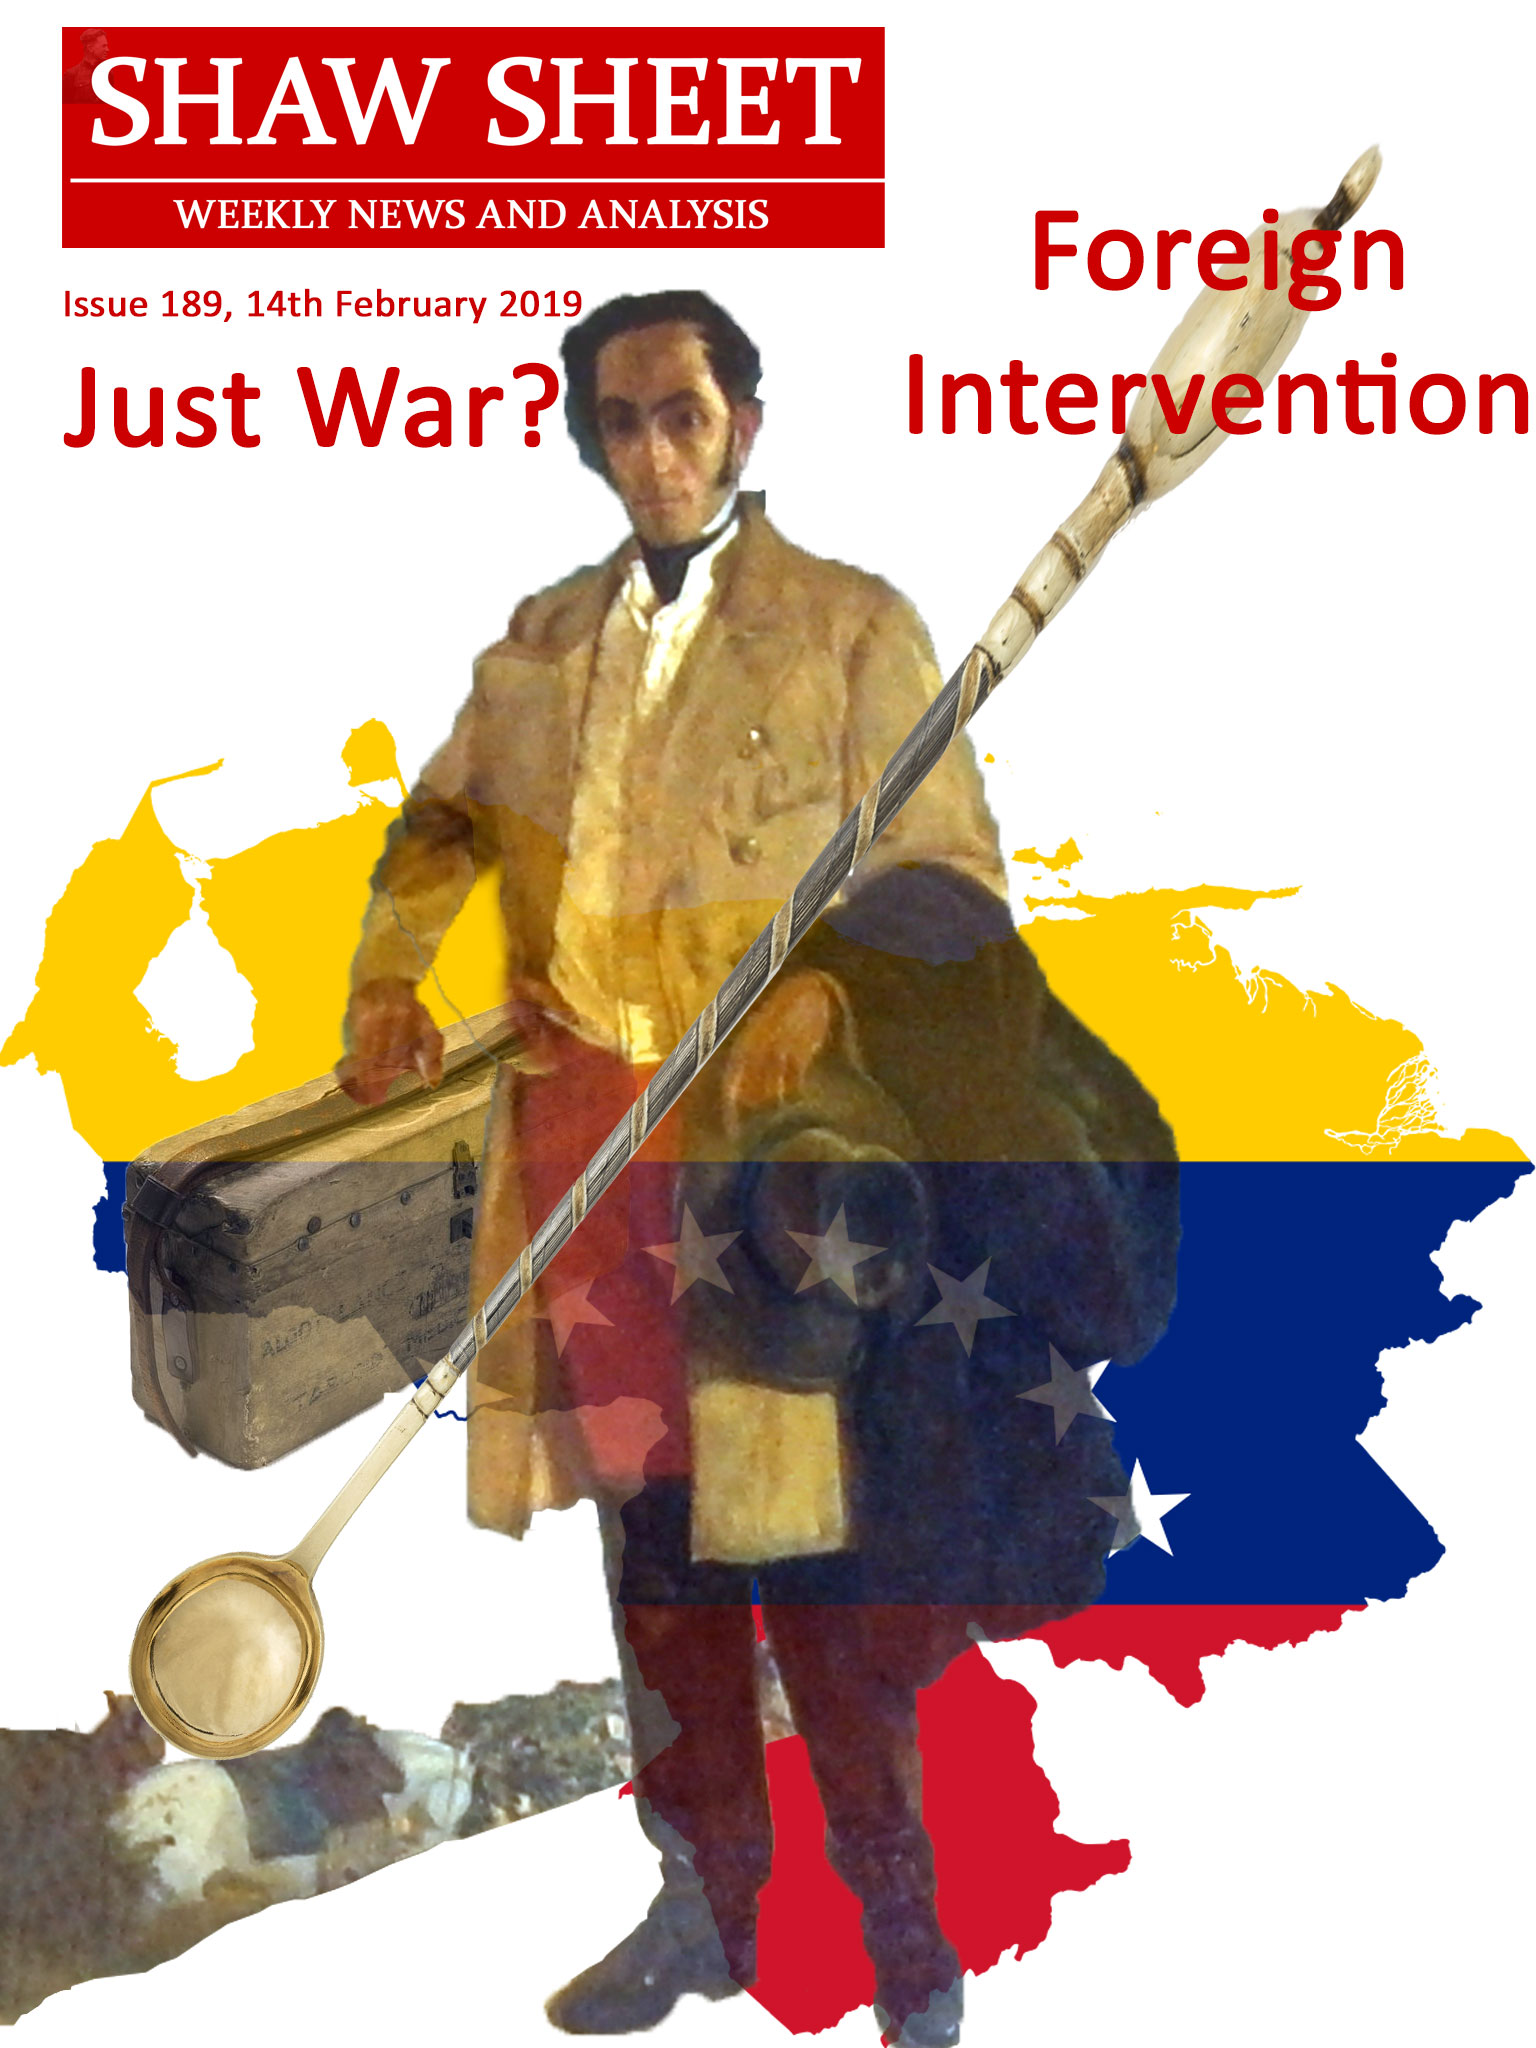 Cover Page 189 Simon Bolivar with suitcase and refugees leaves an outline of Venezuela with its flag behind